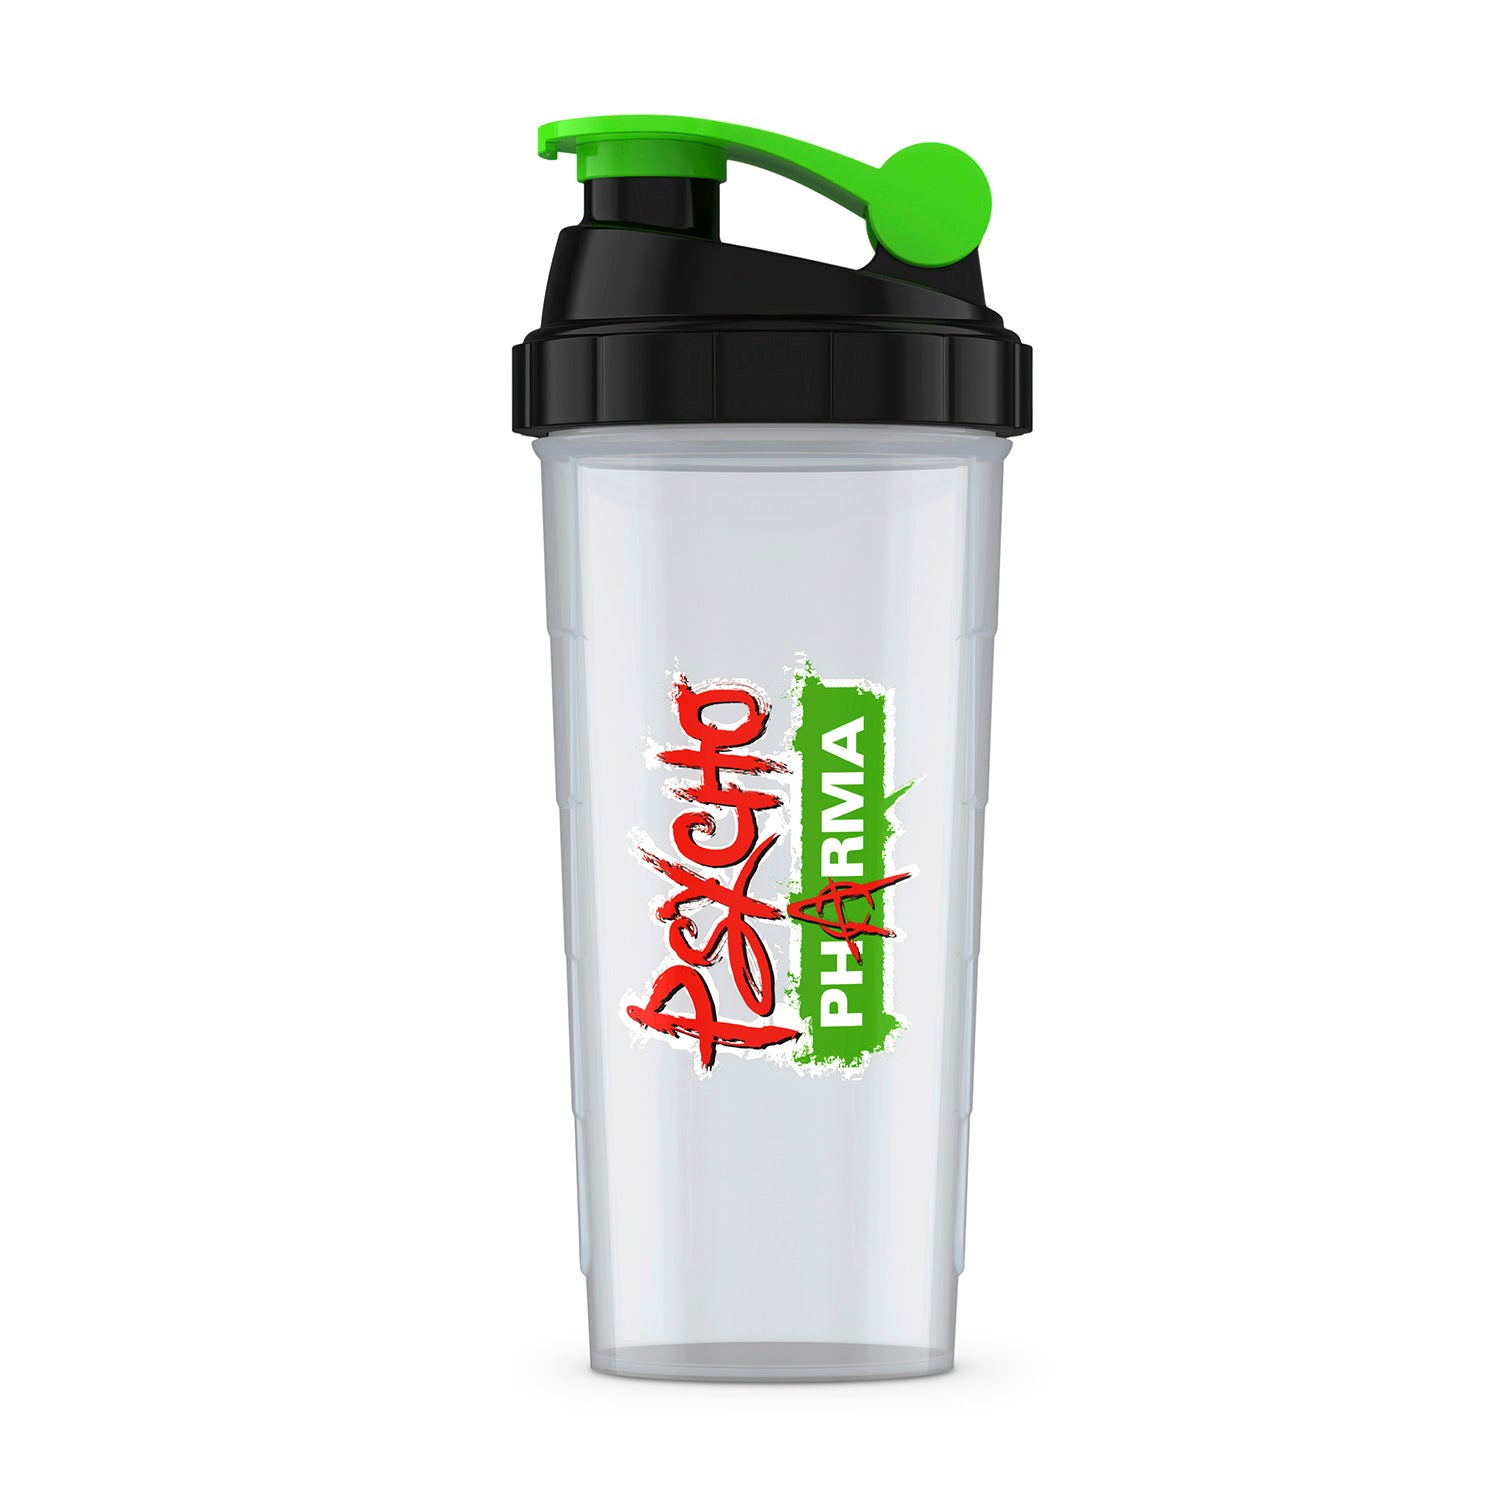 Psycho Pharma Shaker Cup Front angle A1 Supplements Store